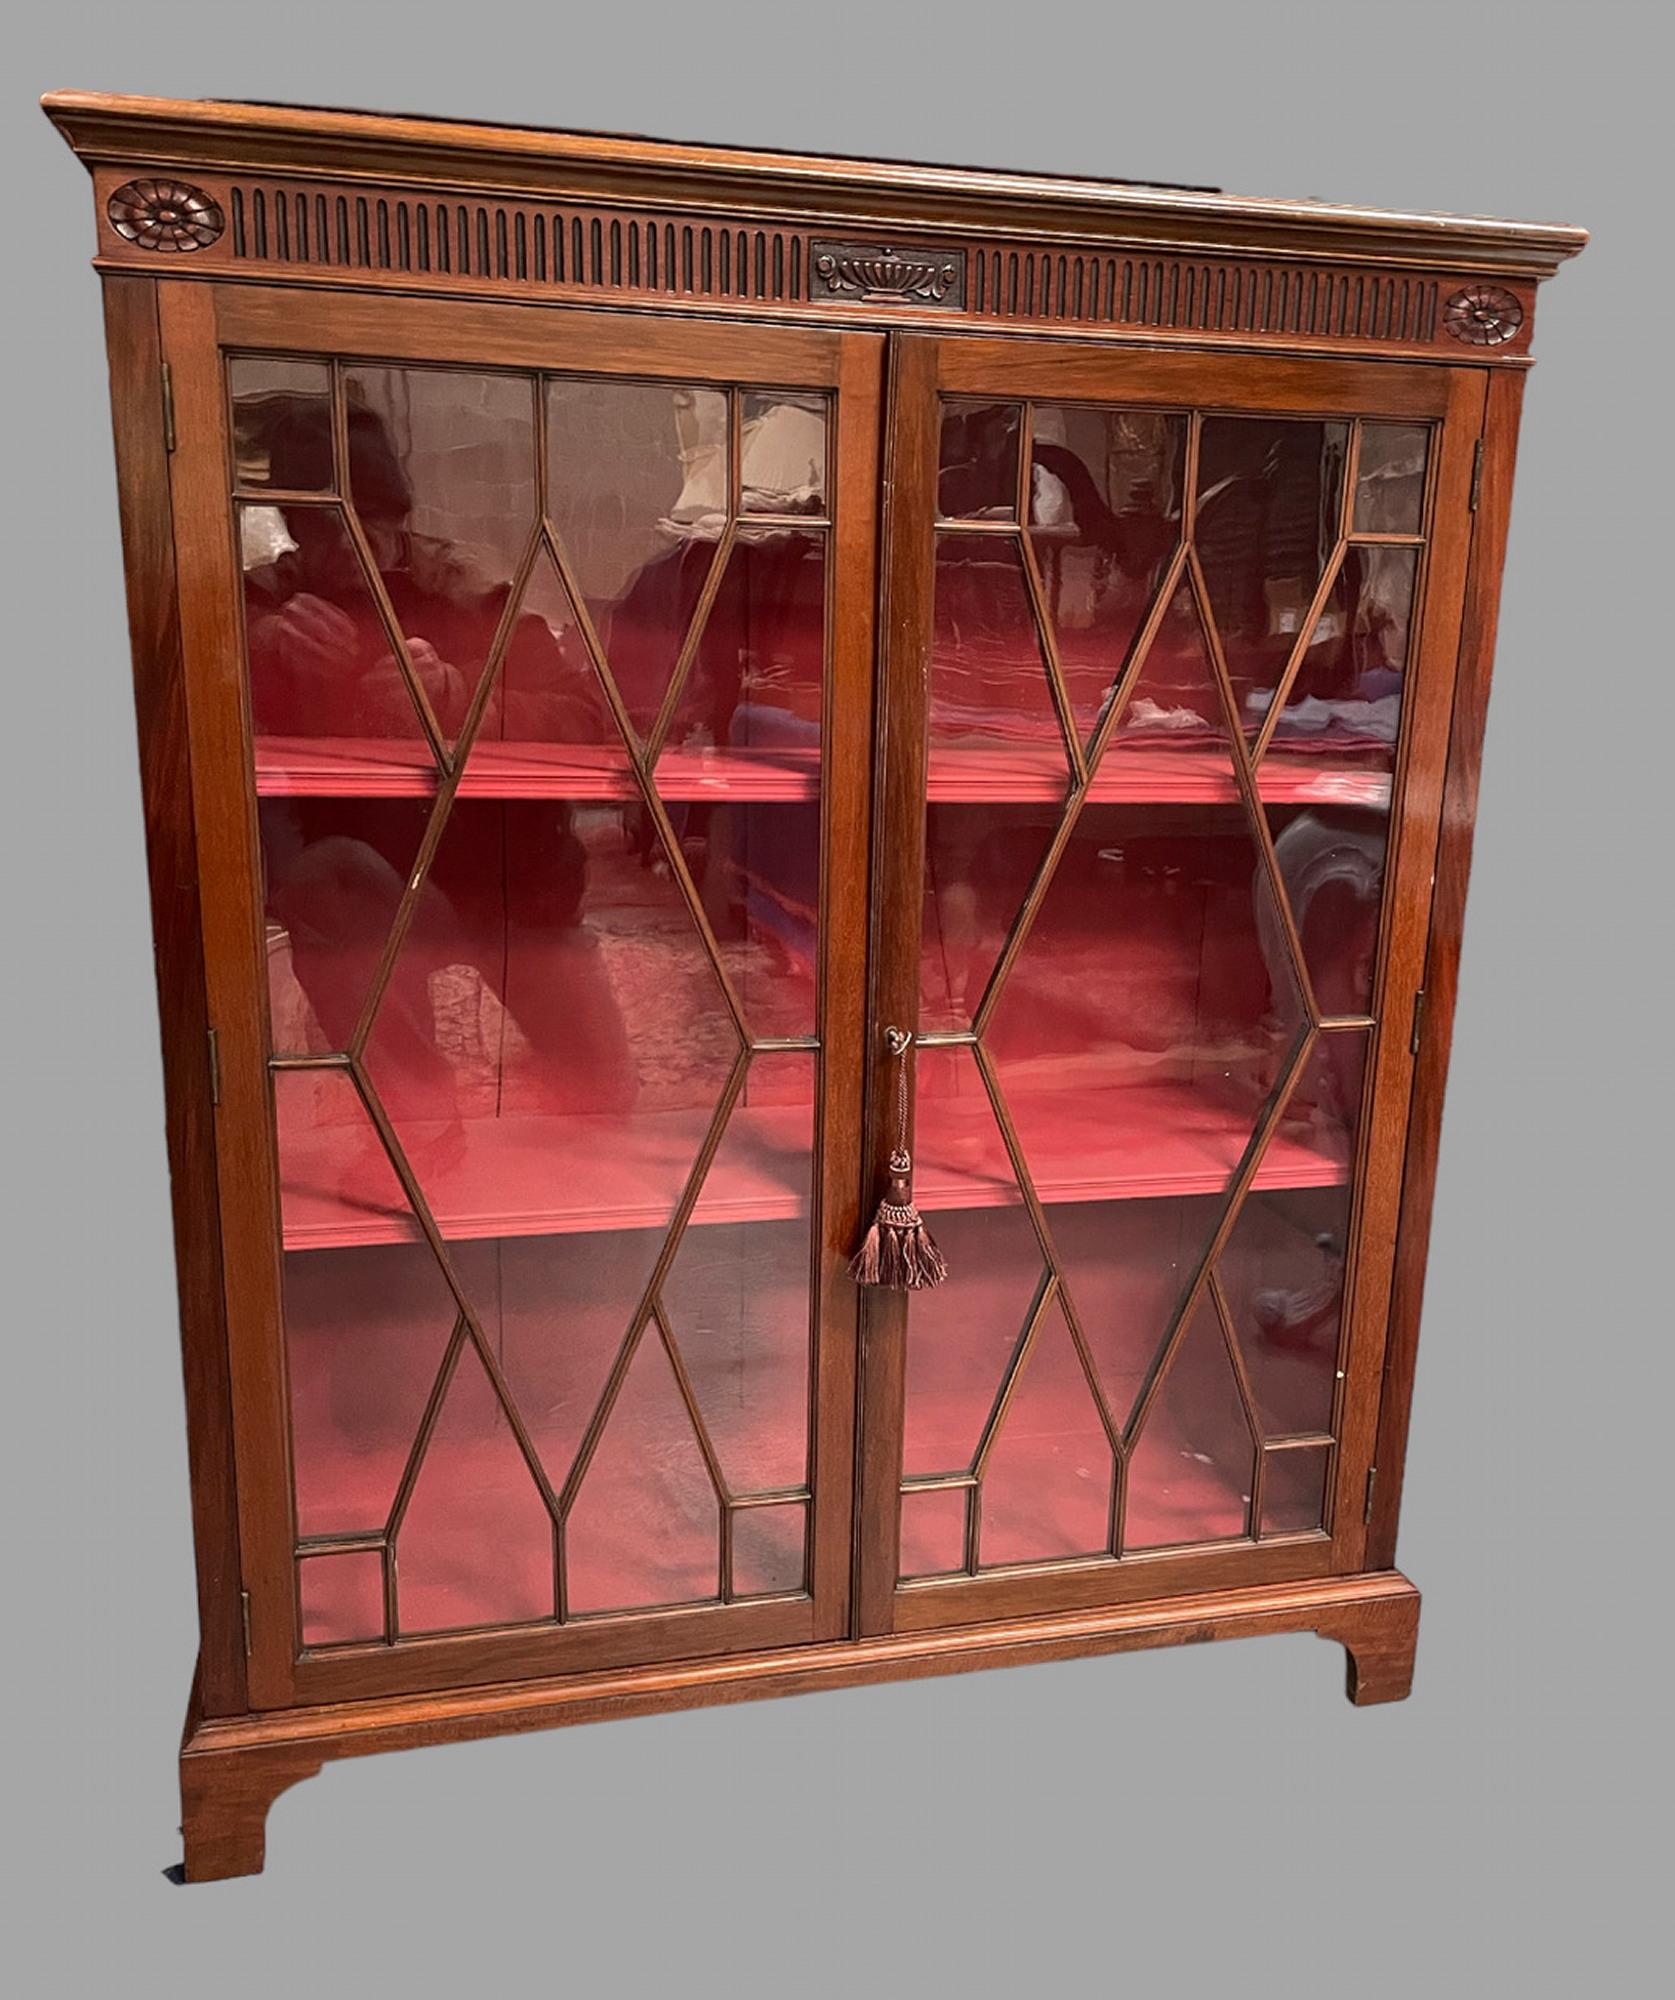 A mahogany Edwardian Bookcase with three shelves, which can be adjusted if needed and painted internally a Regency red.